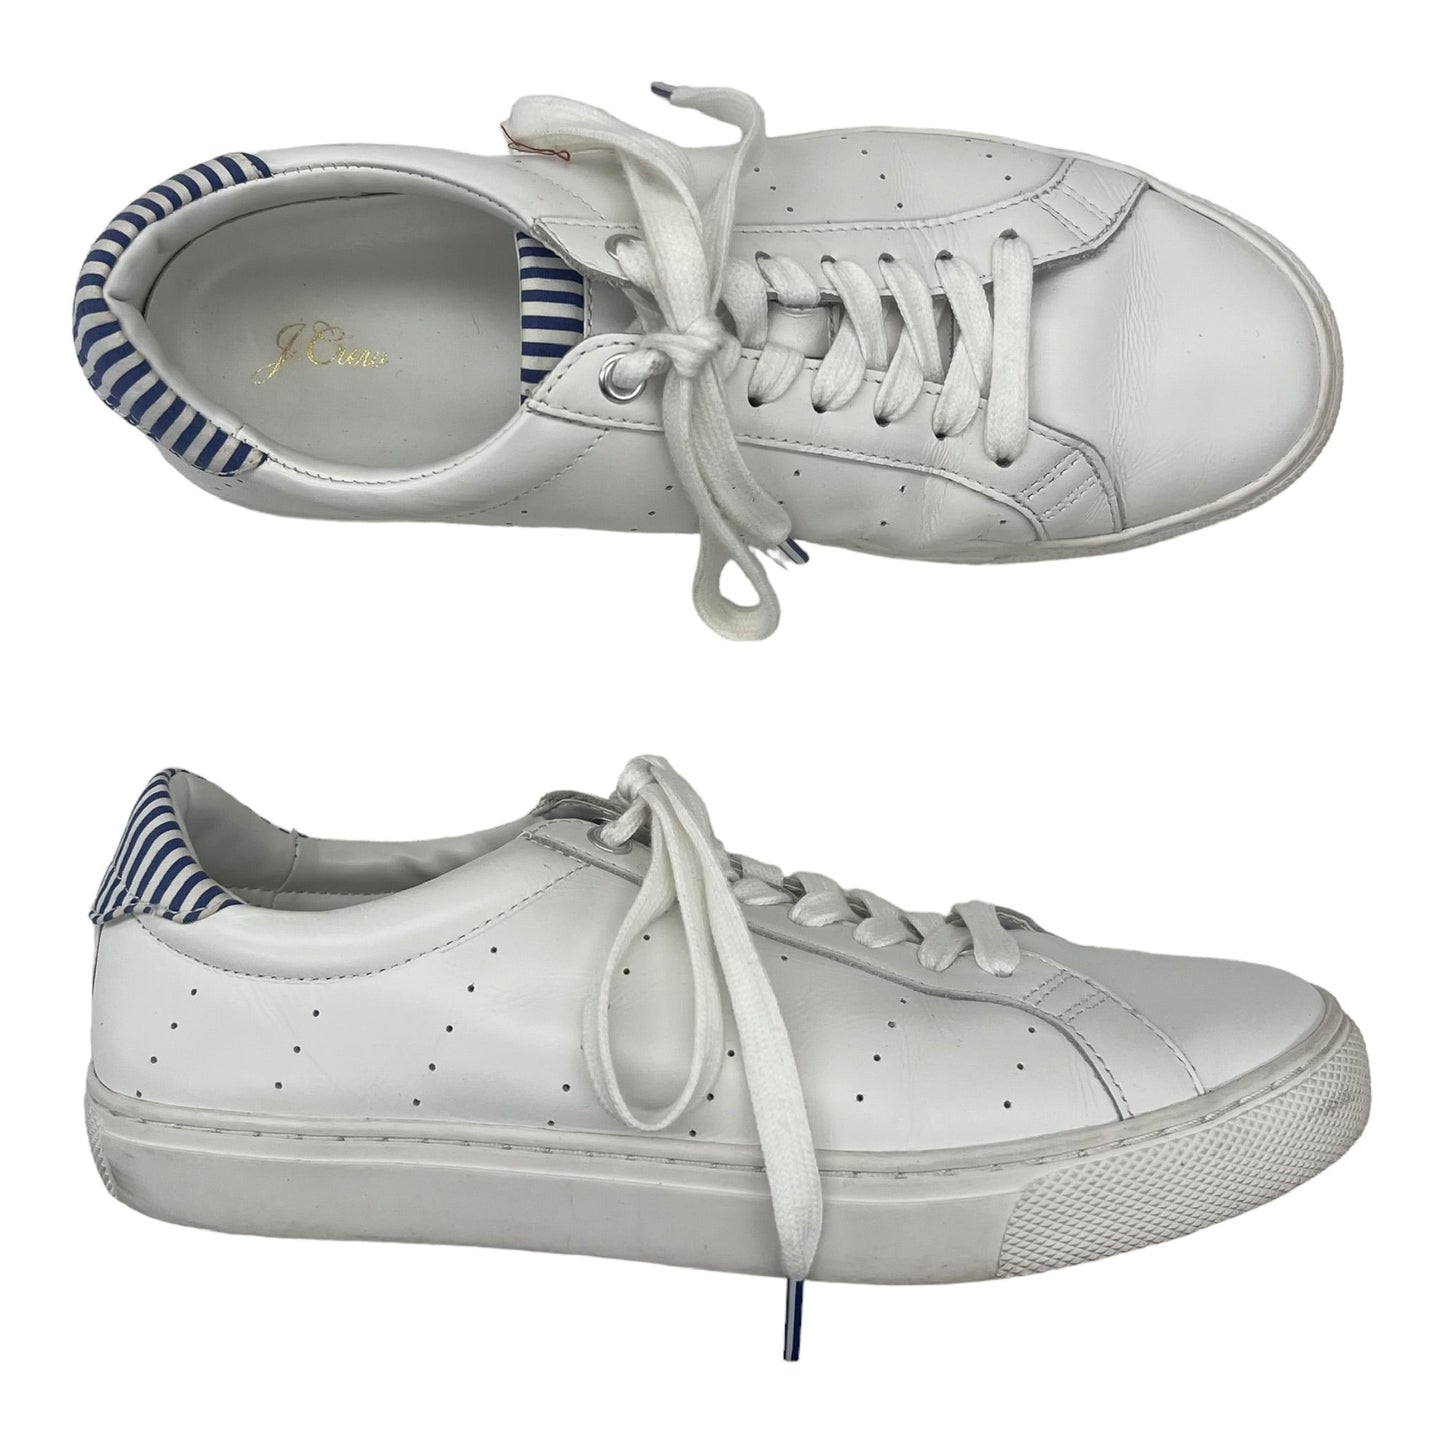 WHITE J. CREW SHOES SNEAKERS, Size 8